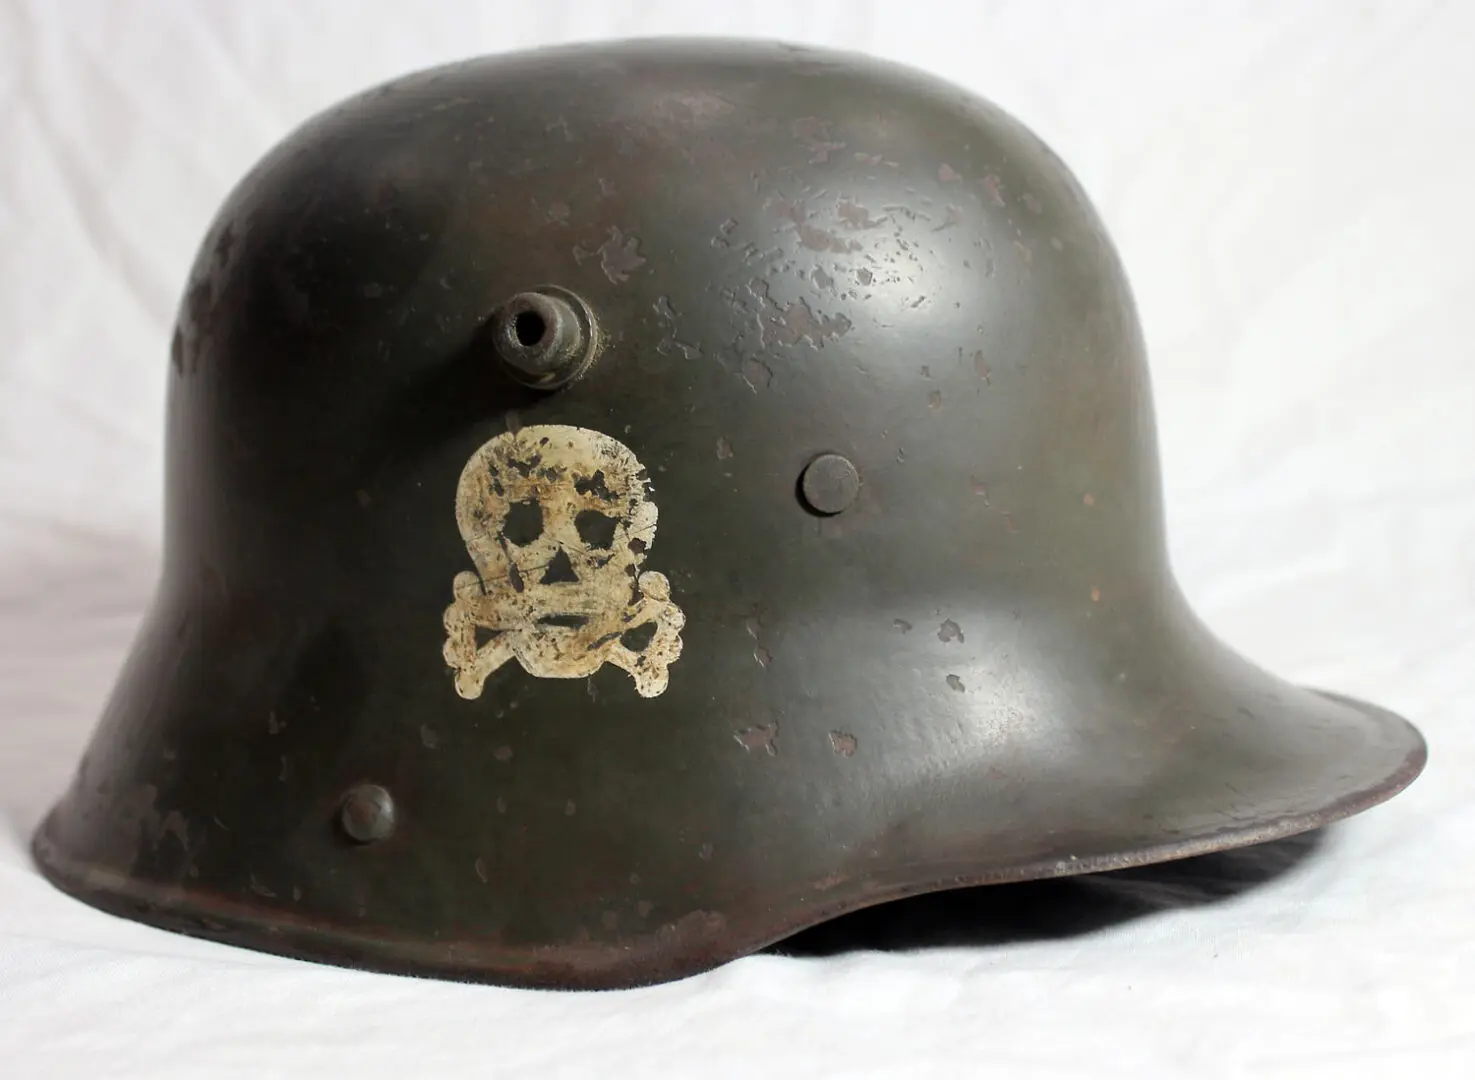 A helmet with a skull and crossbones on it.